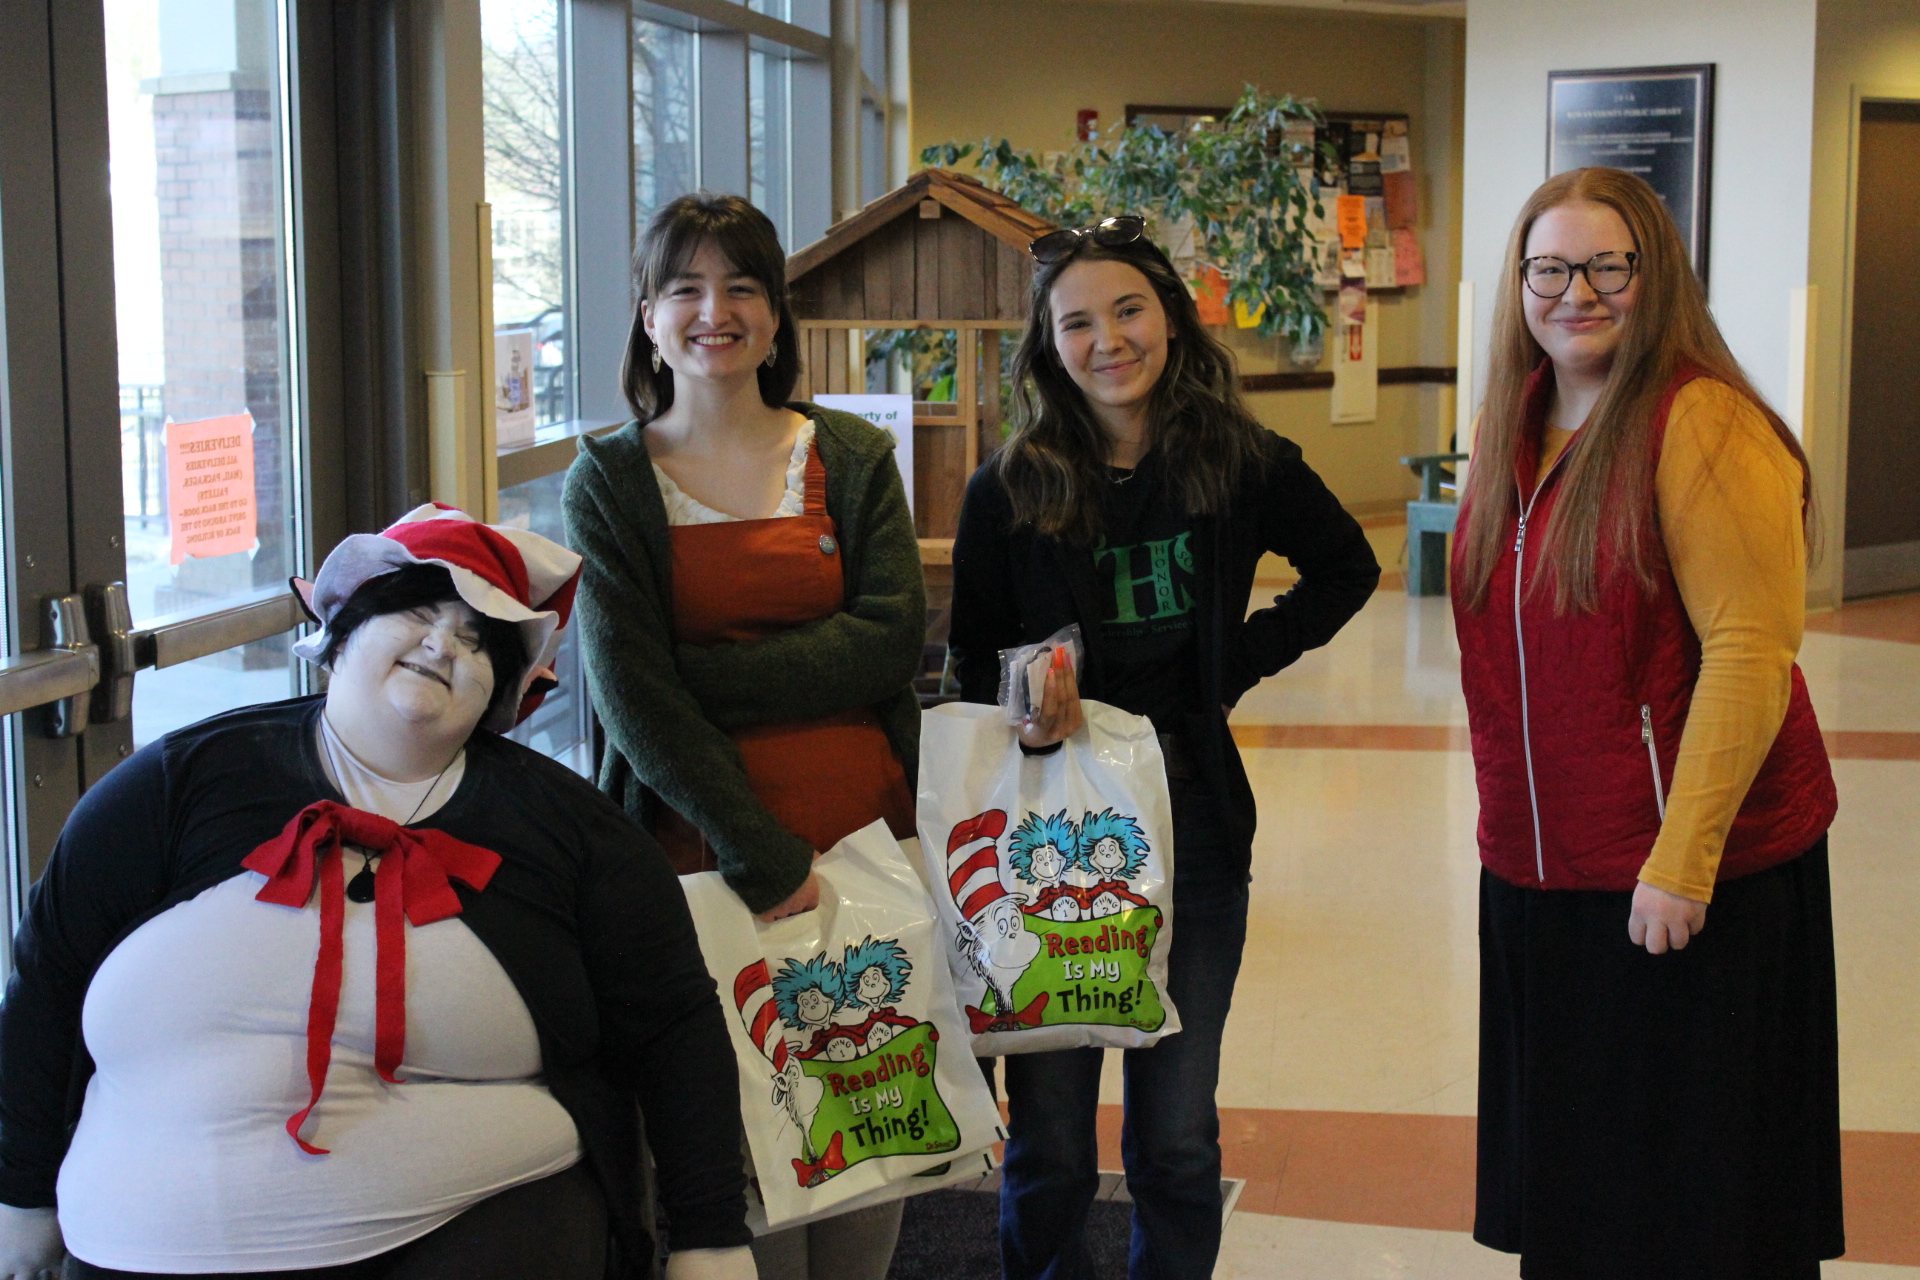 Teen volunteers holding Dr. Seuss bags beside wheelchair user dressed as Dr. Seuss's the Cat in the Hat